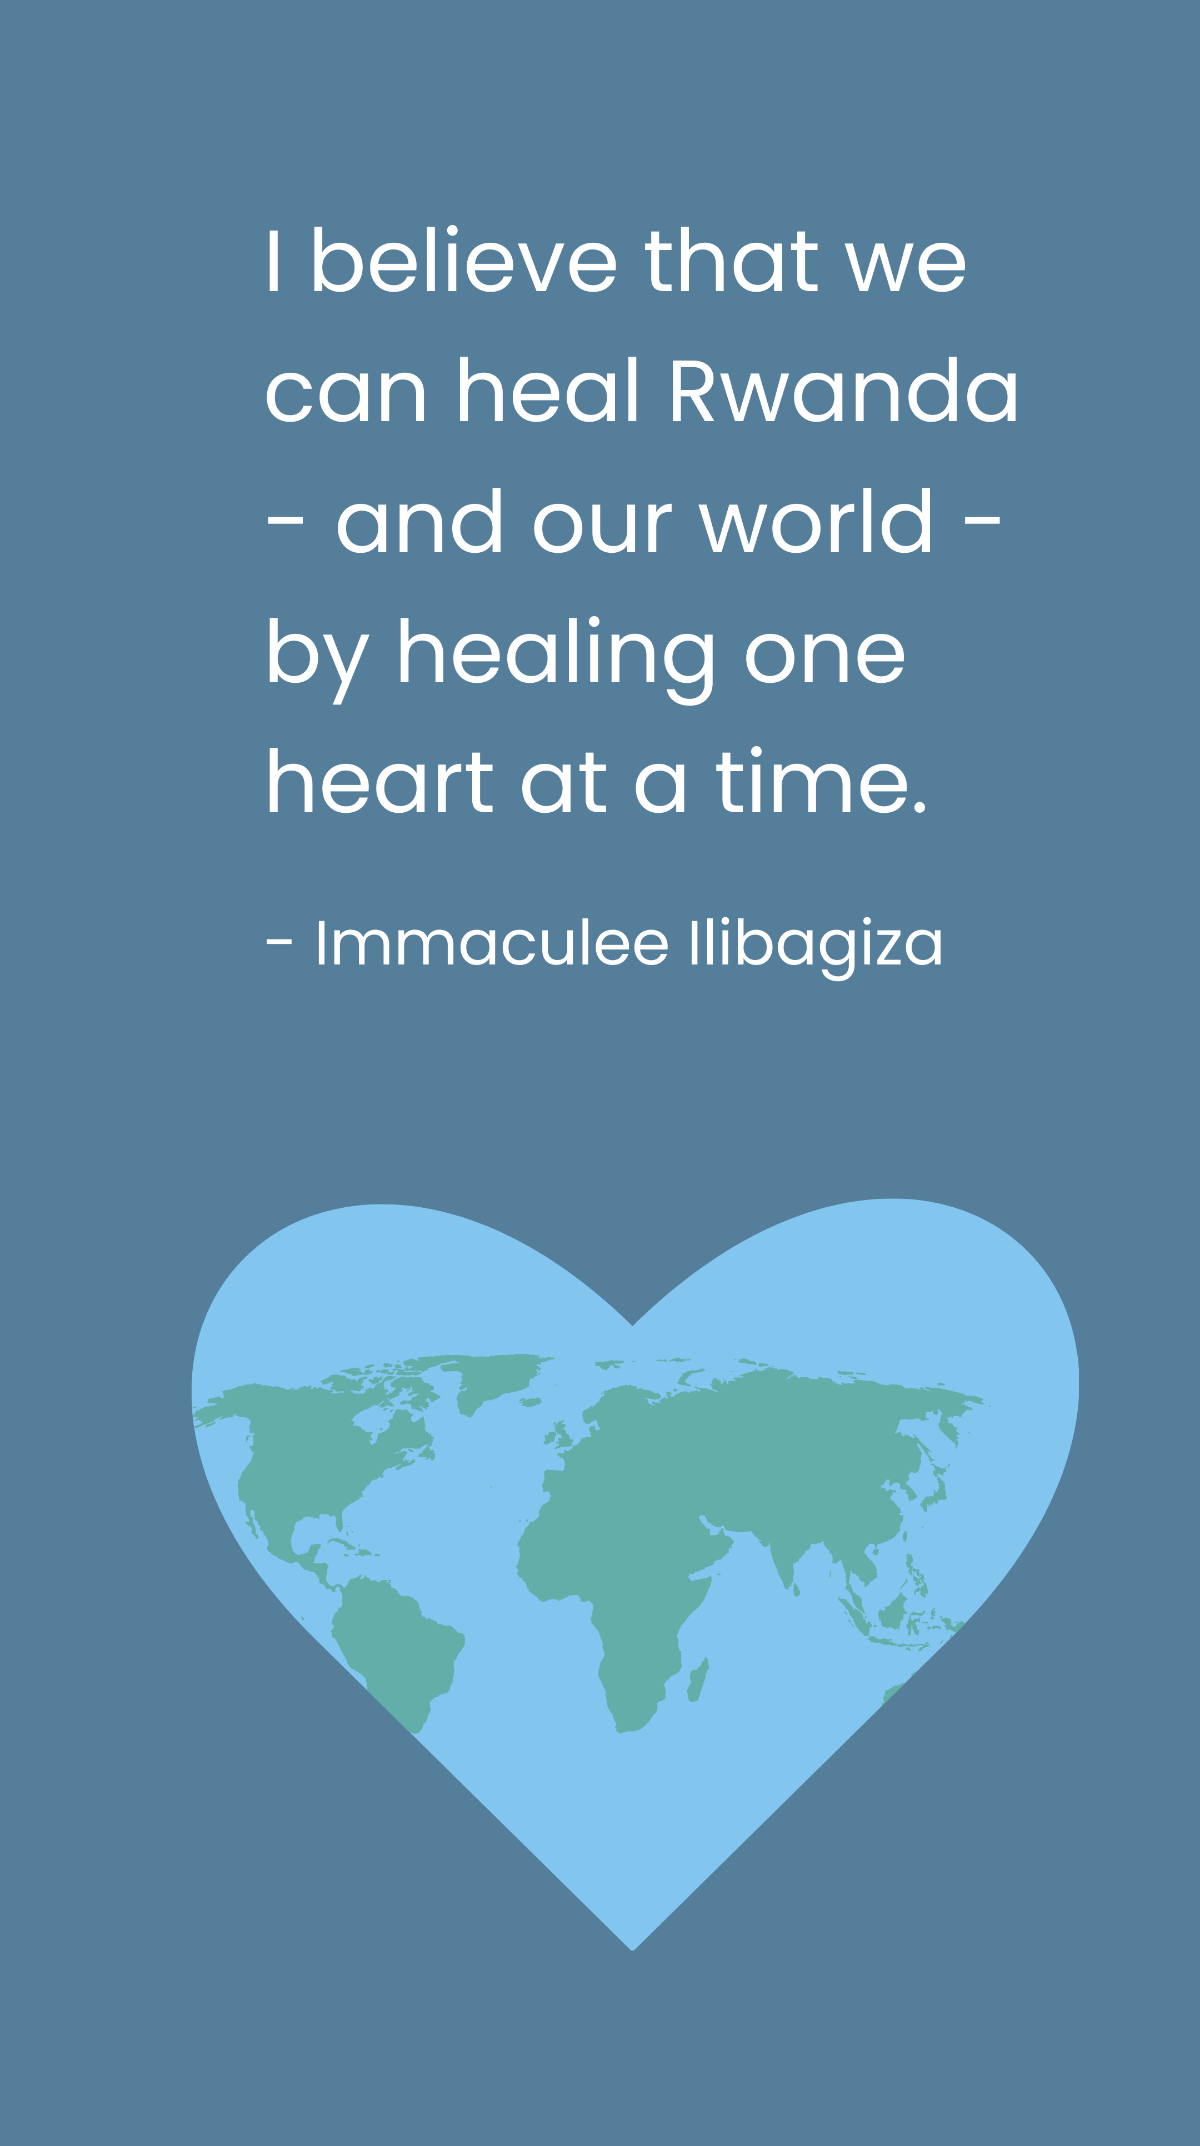 Immaculee Ilibagiza - I believe that we can heal Rwanda - and our world - by healing one heart at a time. Template